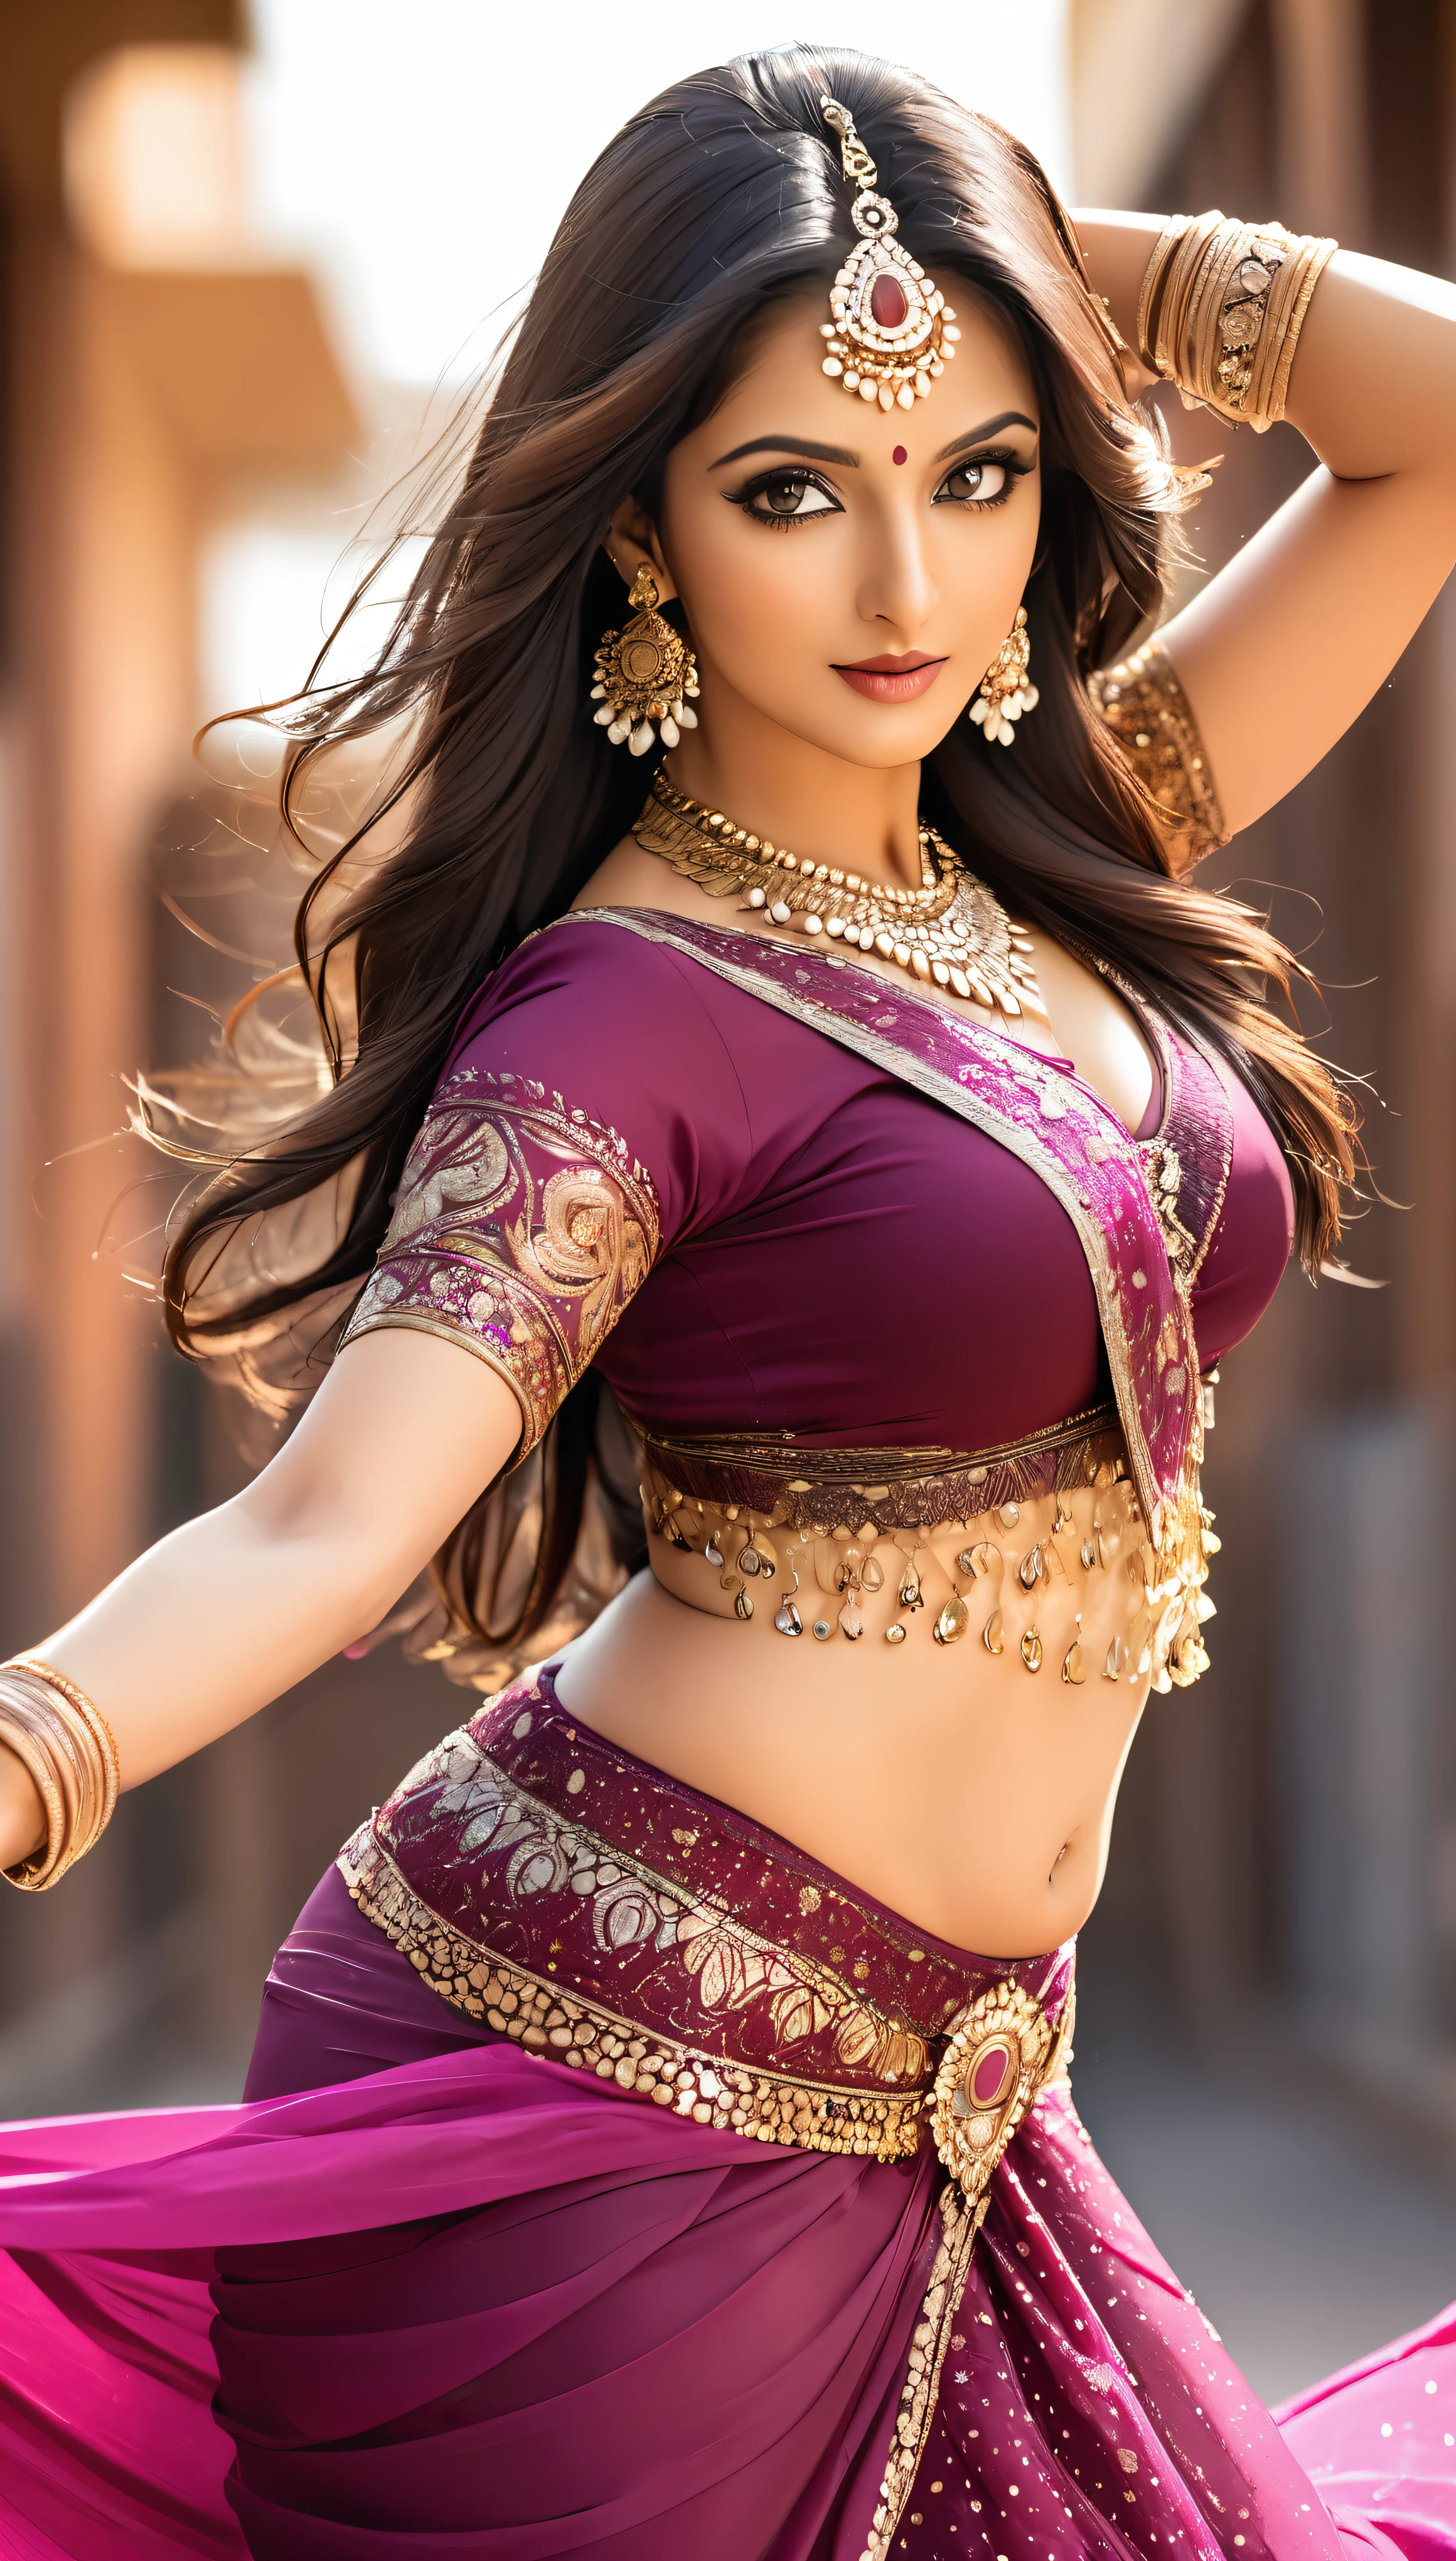 Indian woman dancing belly dance, Very attractive and mature young woman, She captivates the audience in her seductive saree., BEAK Photo, 